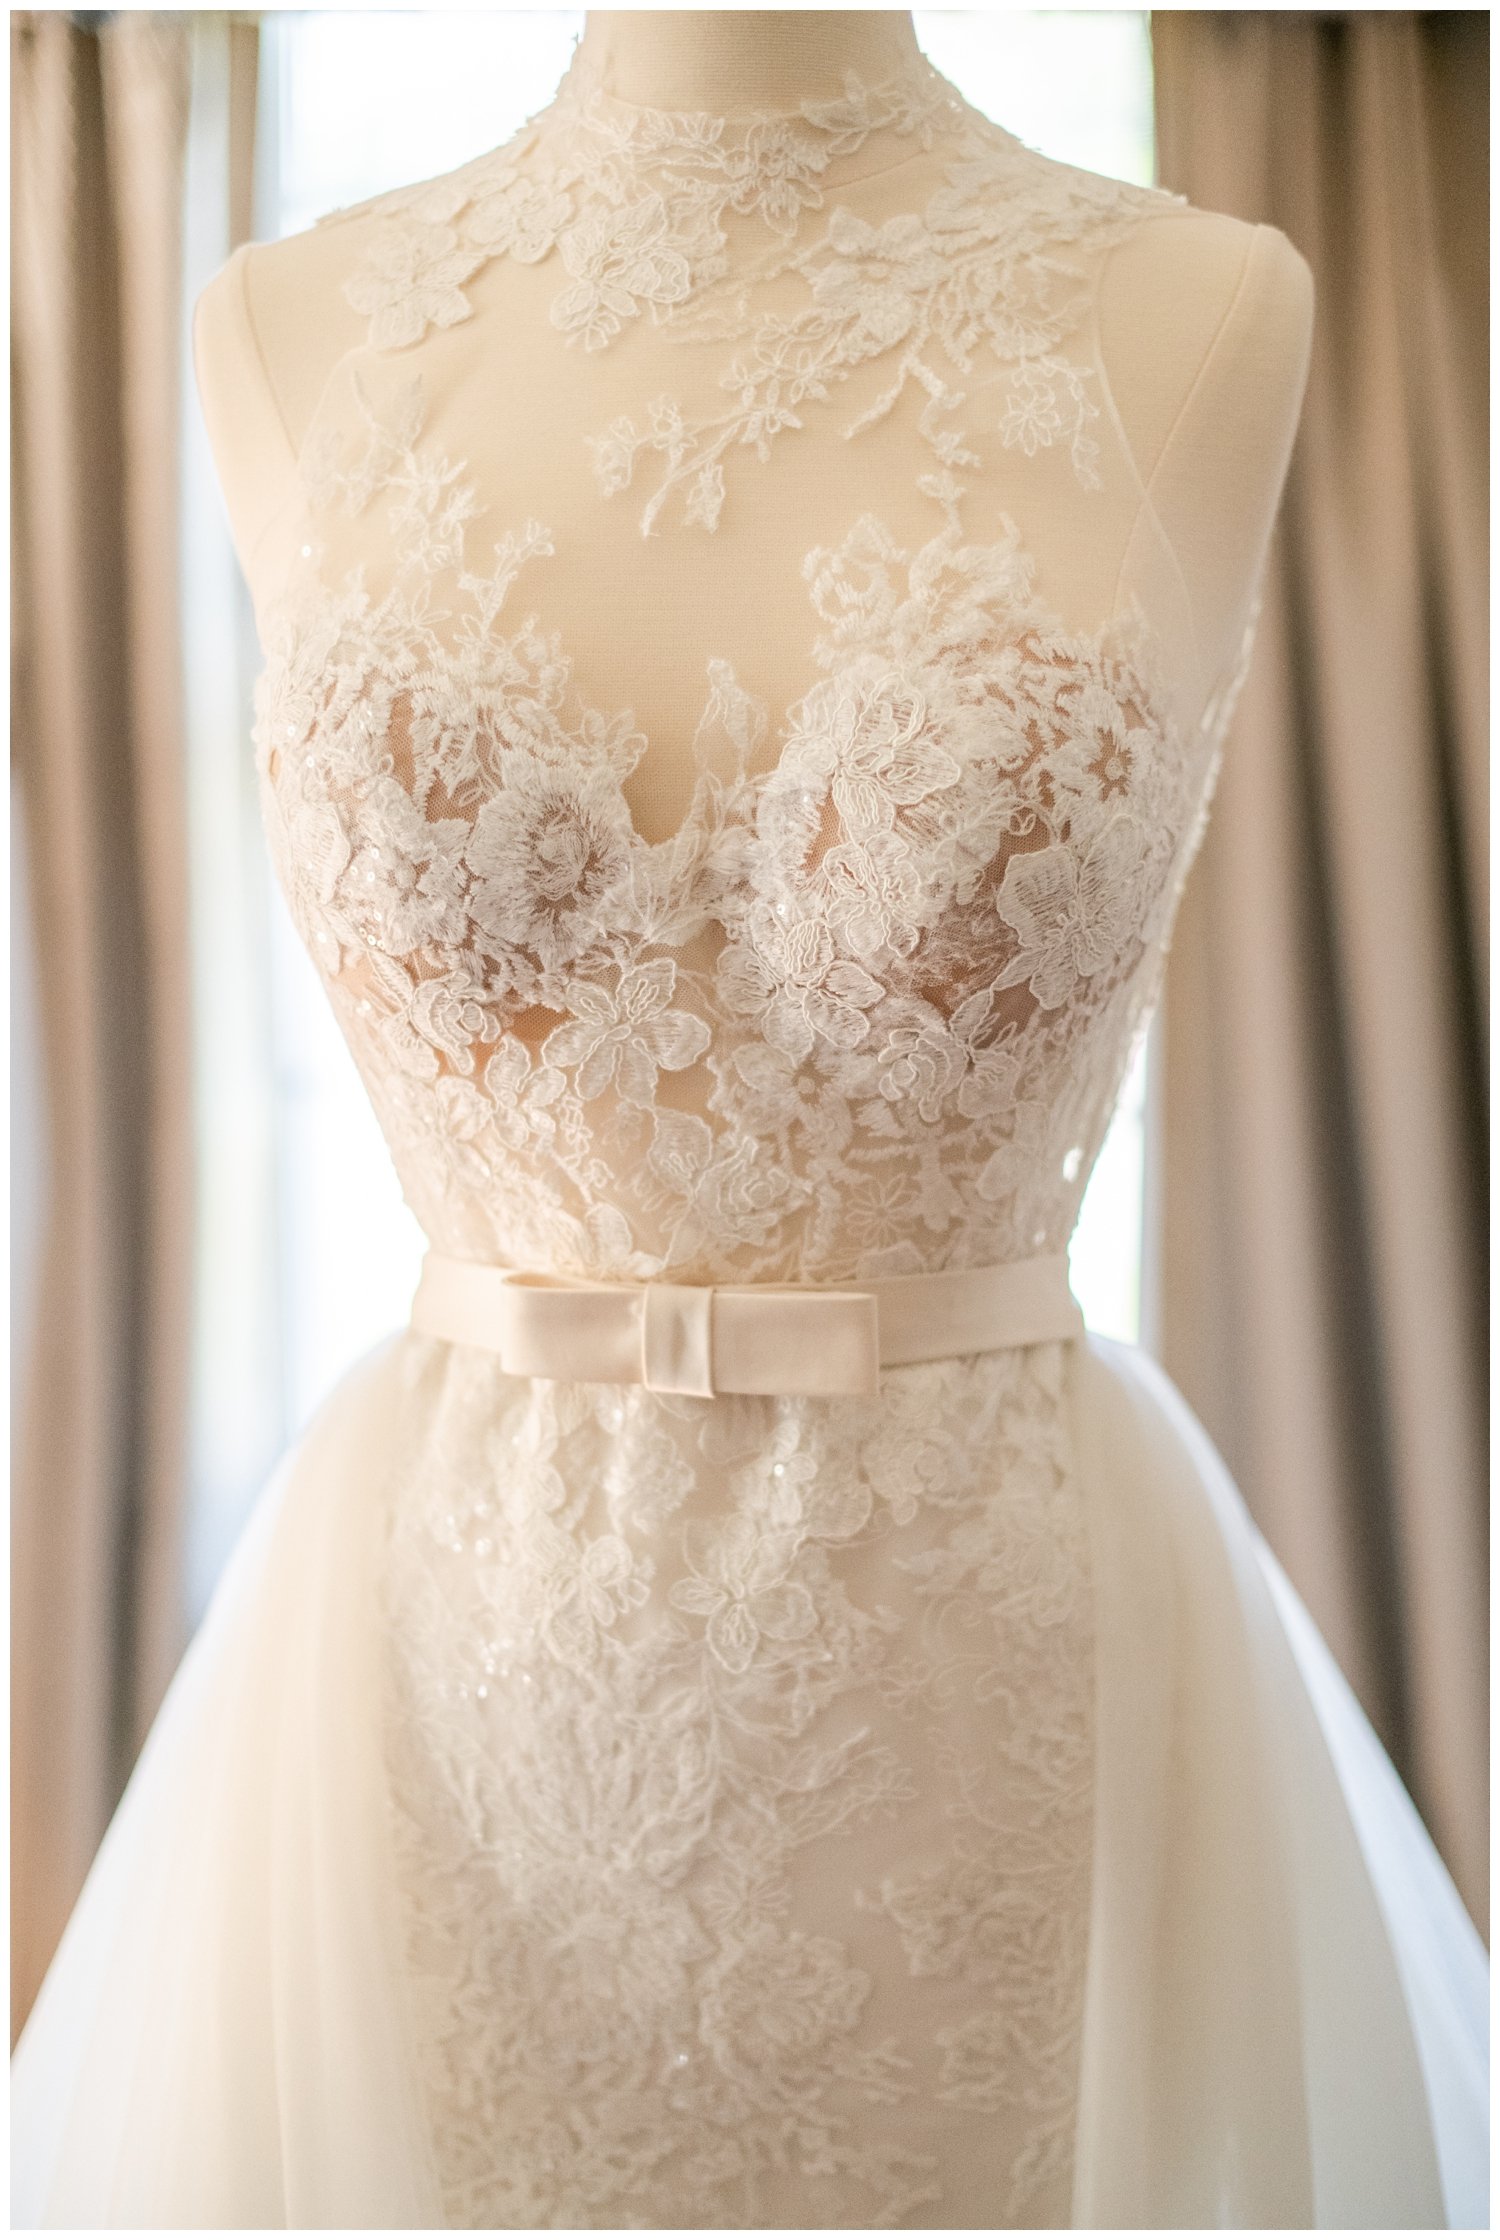 detail close up of wedding gown at Fairmont Copley Plaza